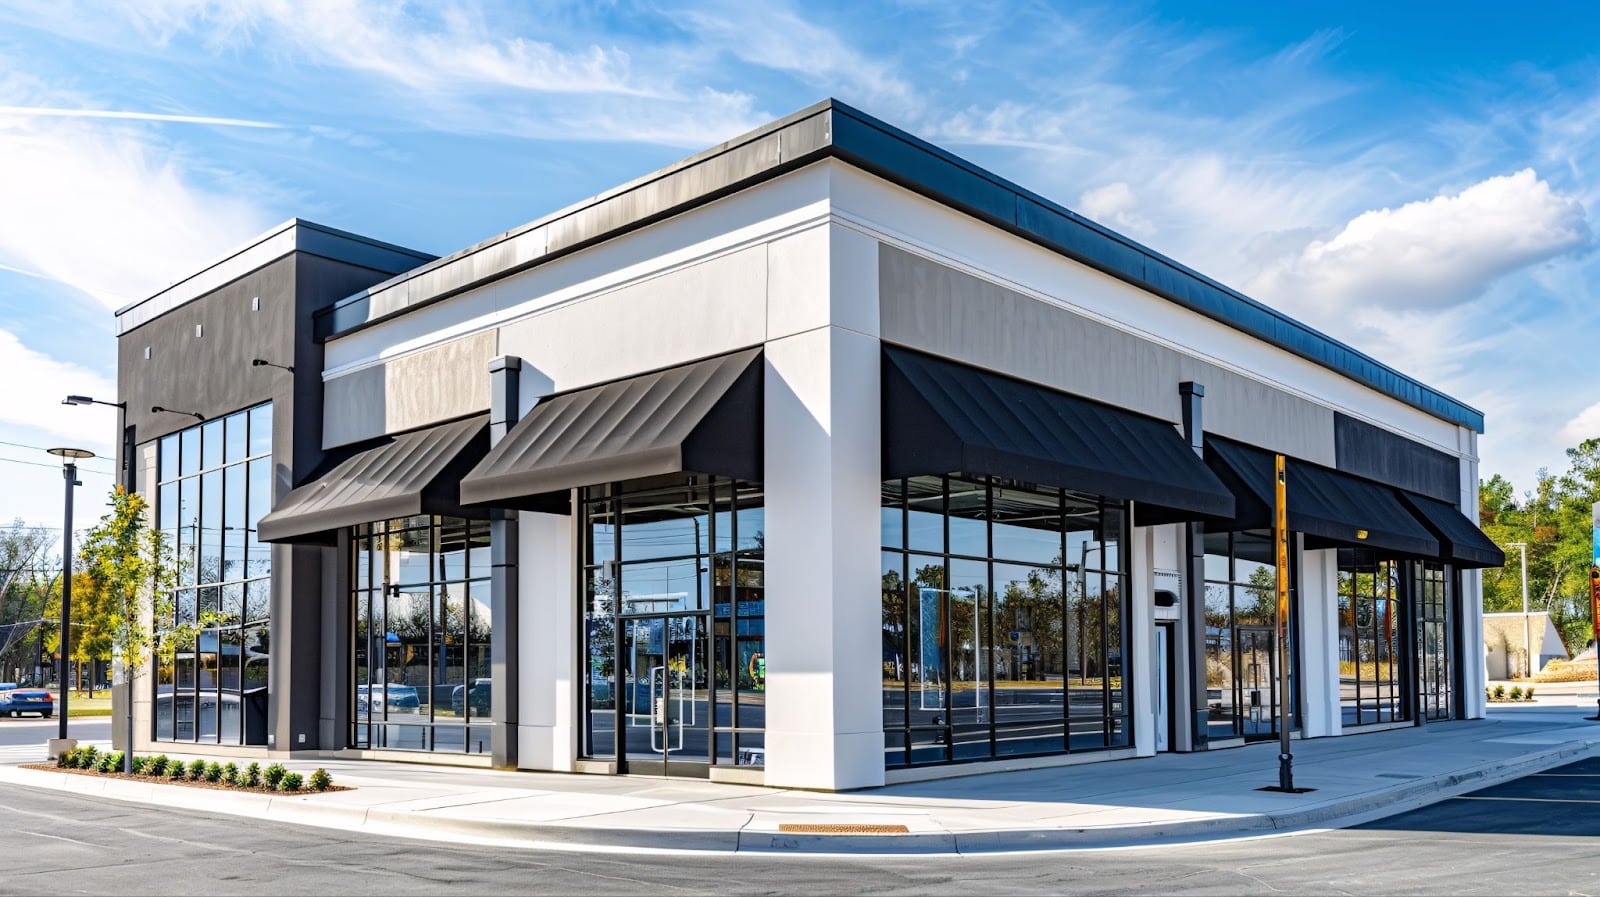 A modern building with black awnings, featuring commercial glass displays and glass repair services.